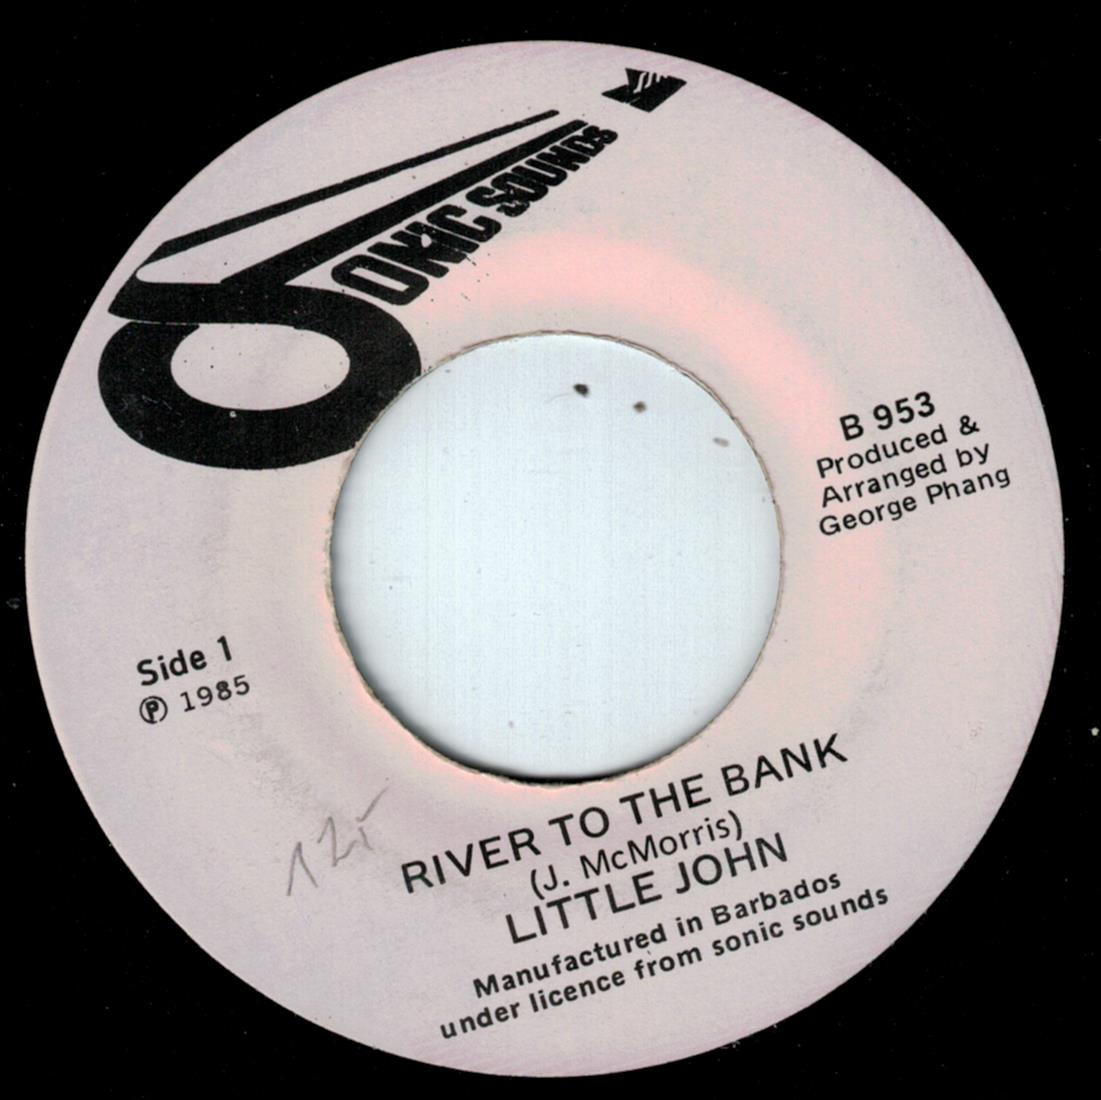 Little John - River To The Bank / Version (7")